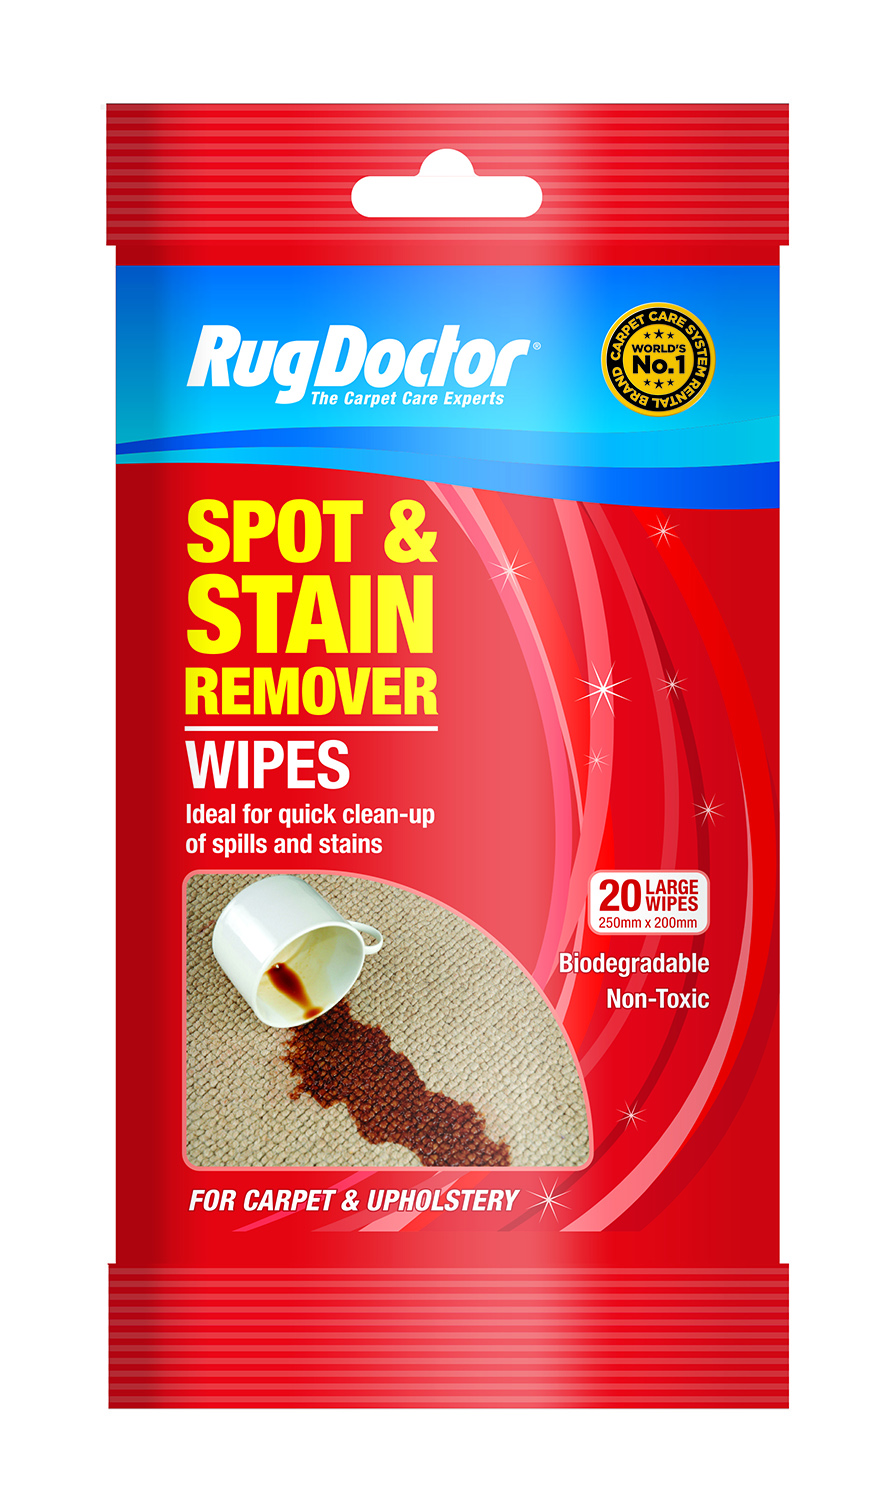 Rug Doctor Spot and Stain Wipes Image